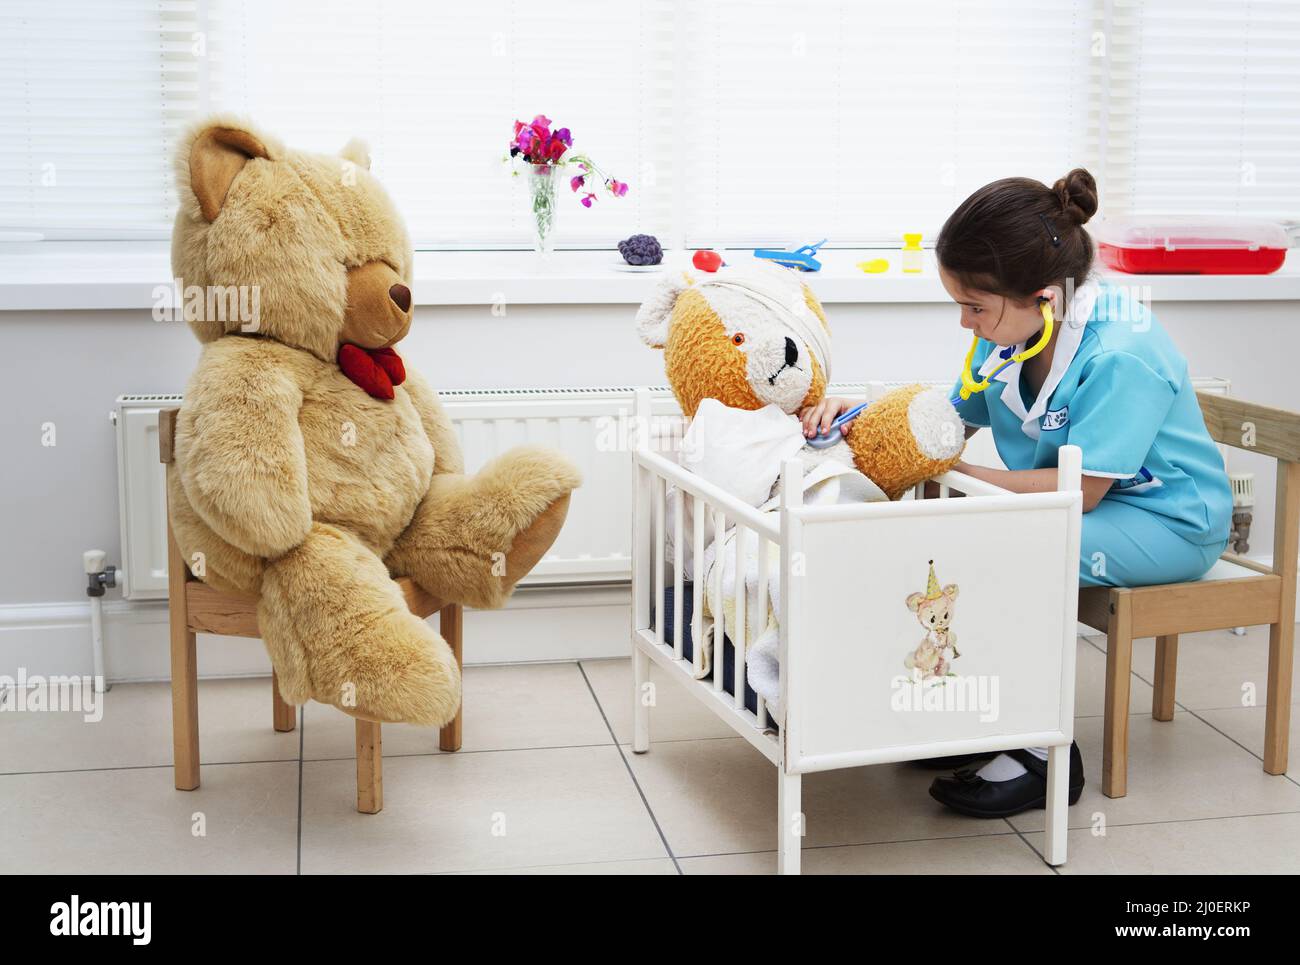 Caucasian girl nursing her teddy bear themes of daydreaming imagination ambition Stock Photo